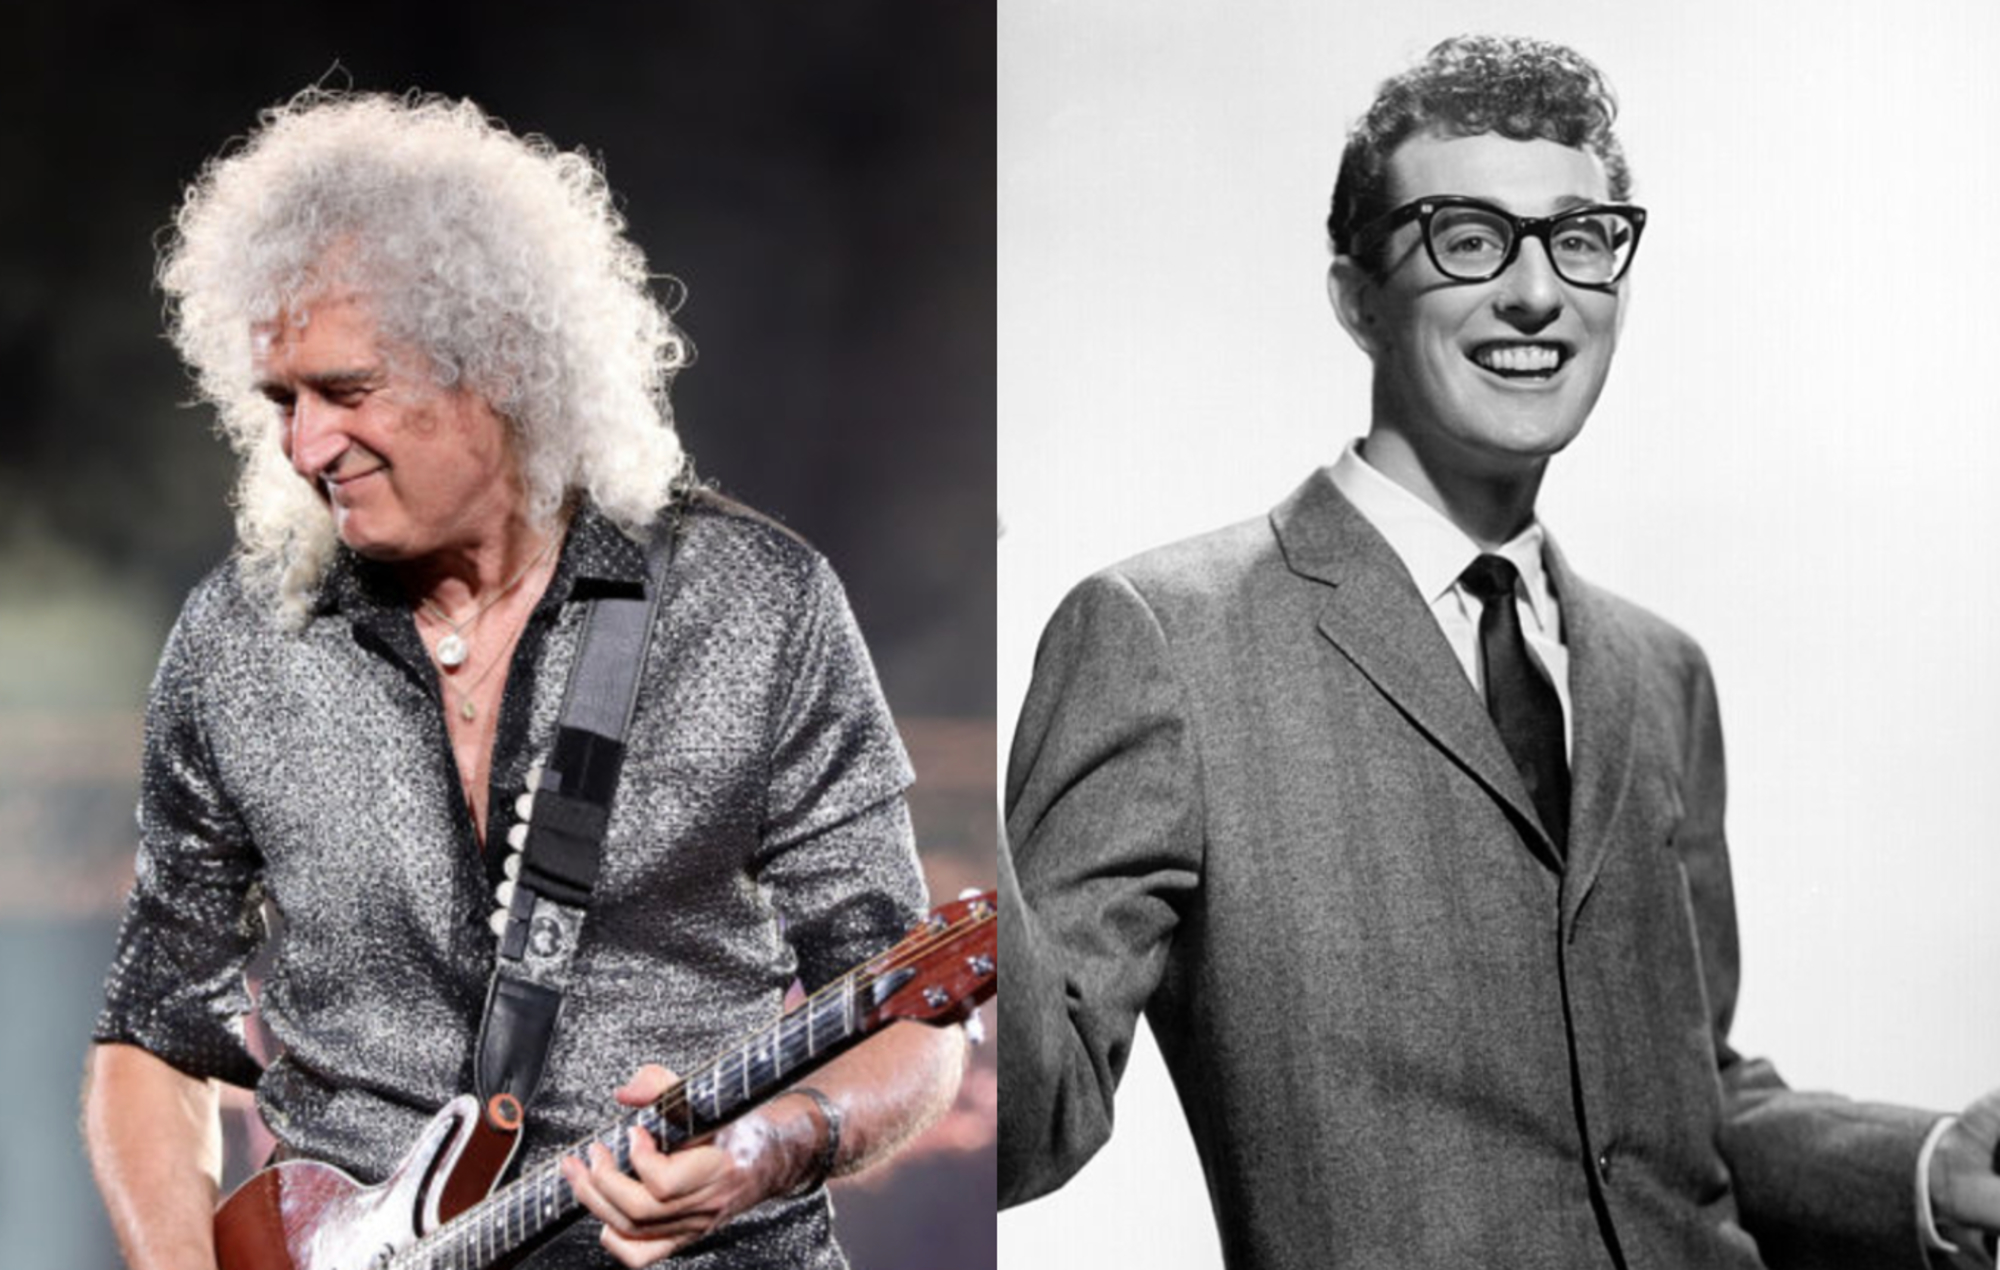 Brian may pays tribute to buddy holly with cover of maybe baby